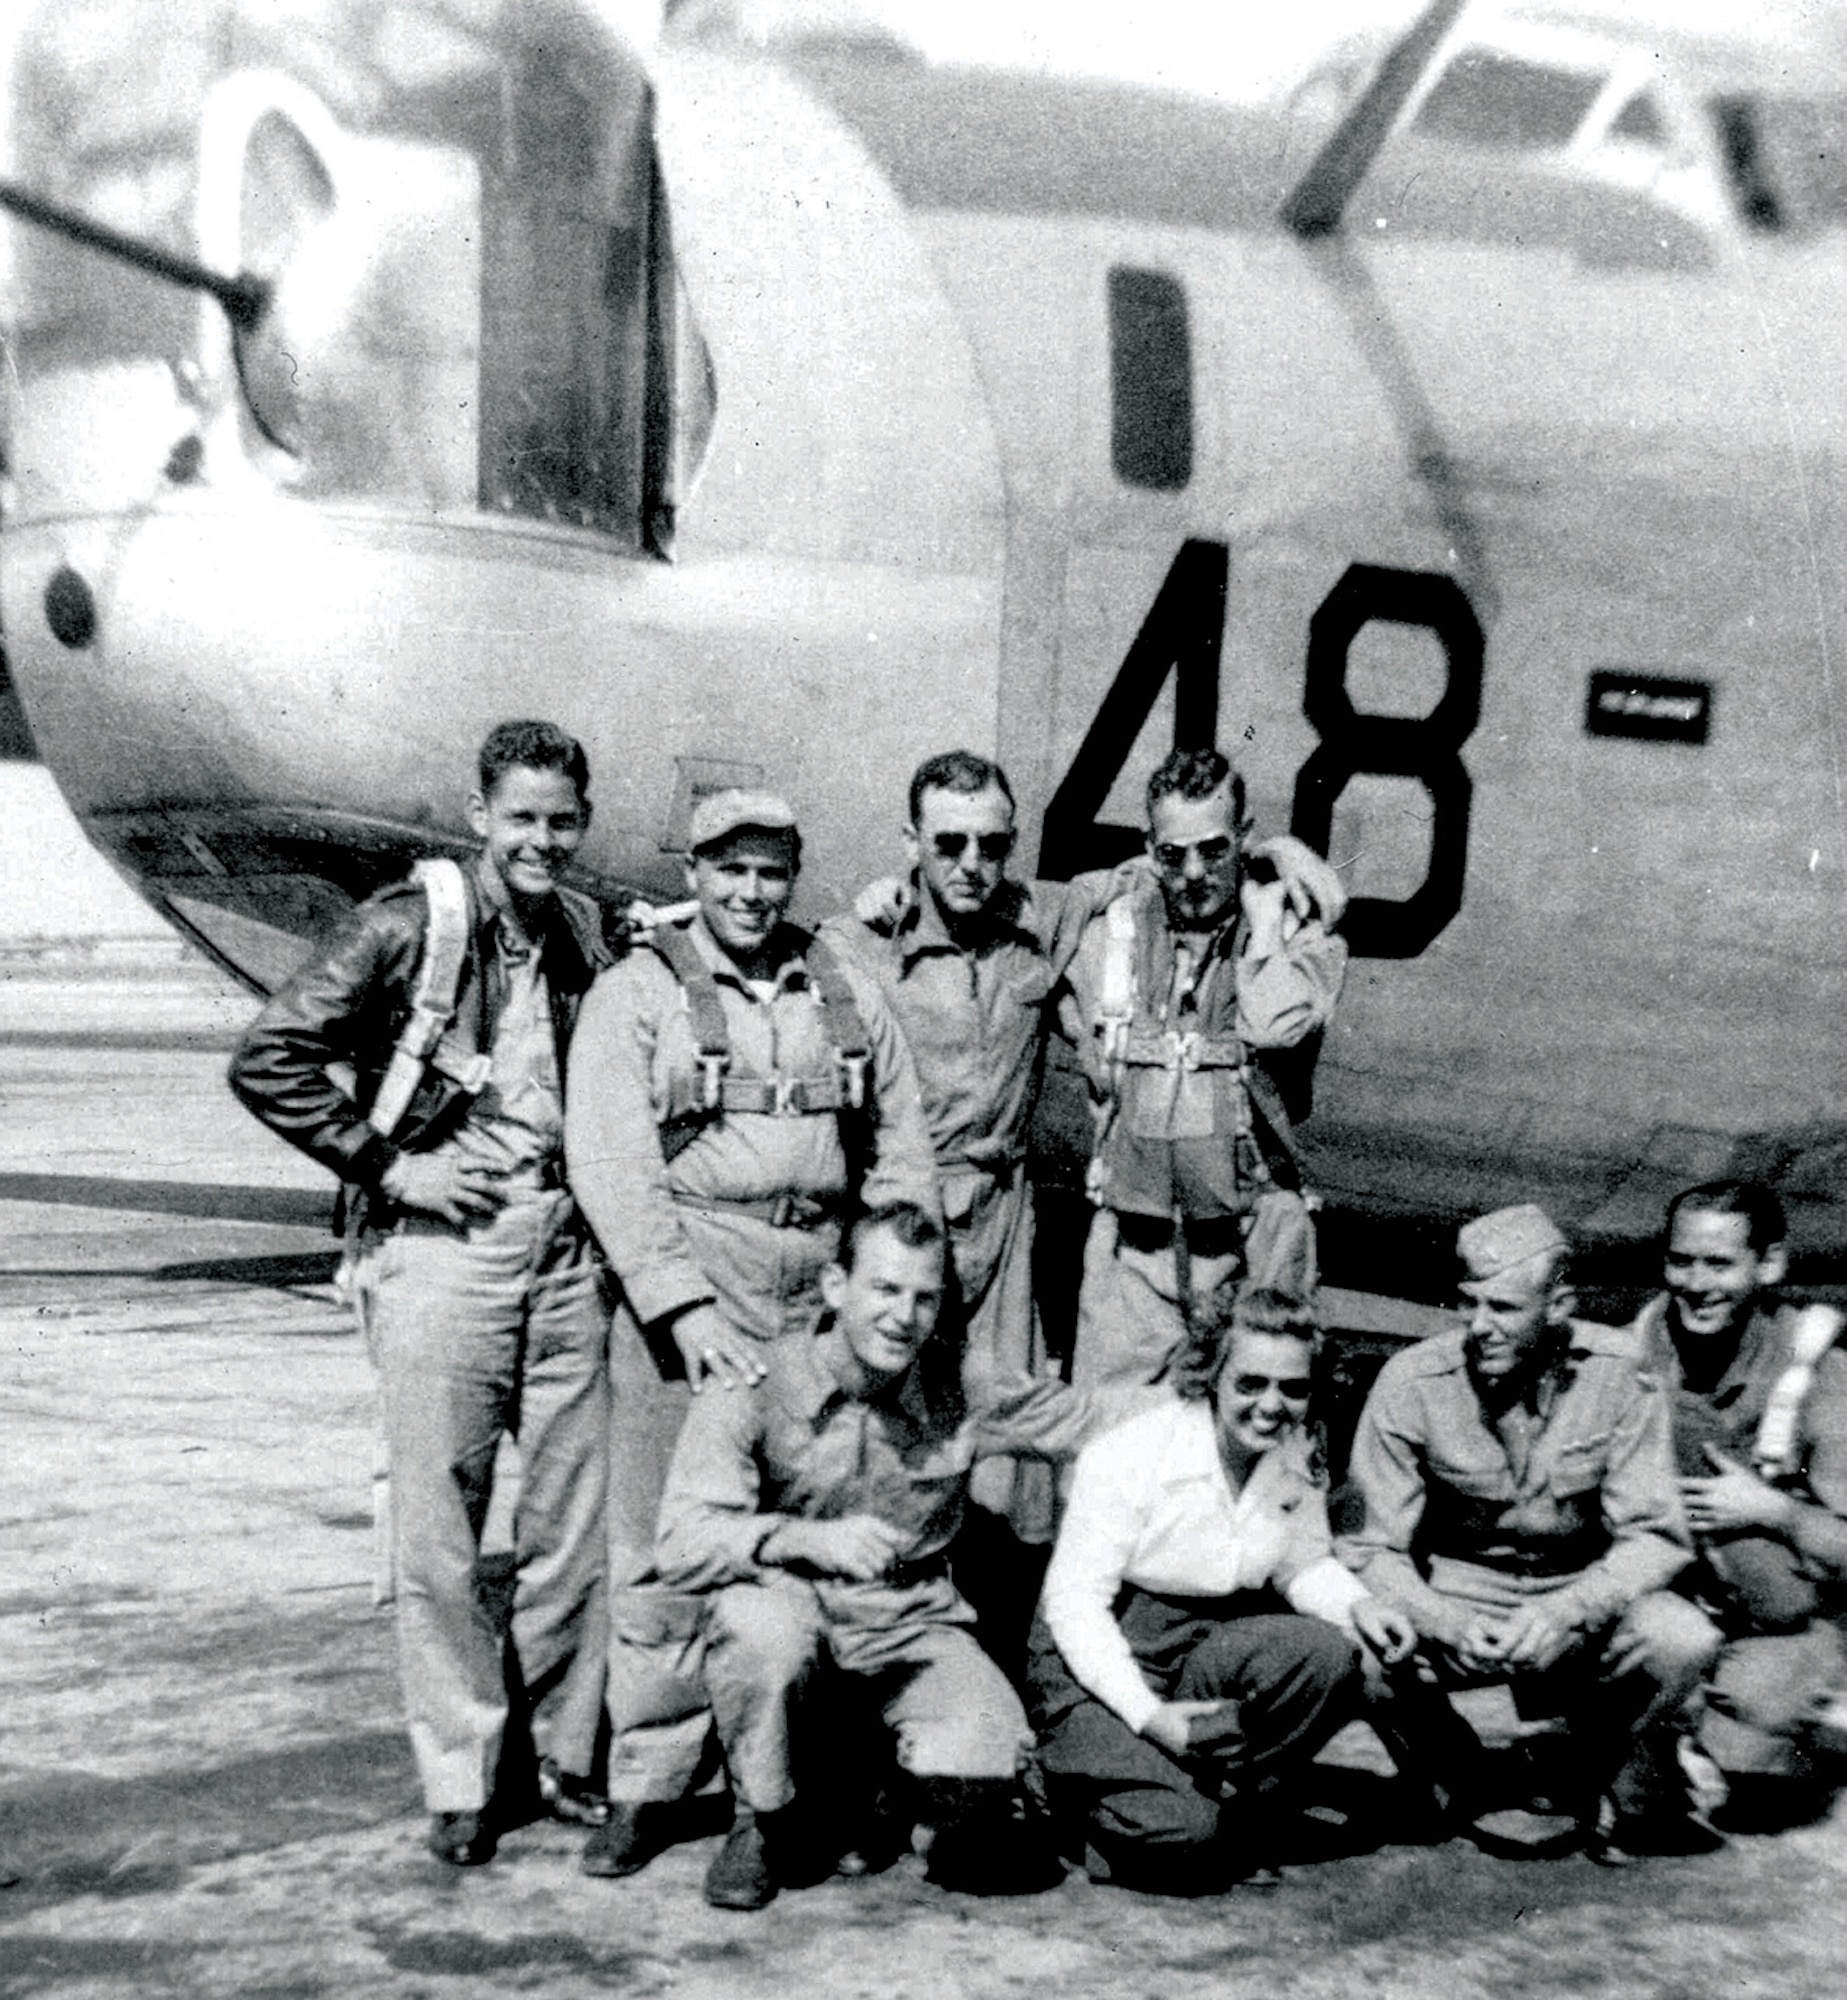 Deanie Parrish (bottom row, center) poses with other pilots during the early 1940s. As a WASP, she wanted to show that women could fly like any "one of the guys." Her husband is in the back row, second from right. (Courtesy photo/Deanie Parrish)